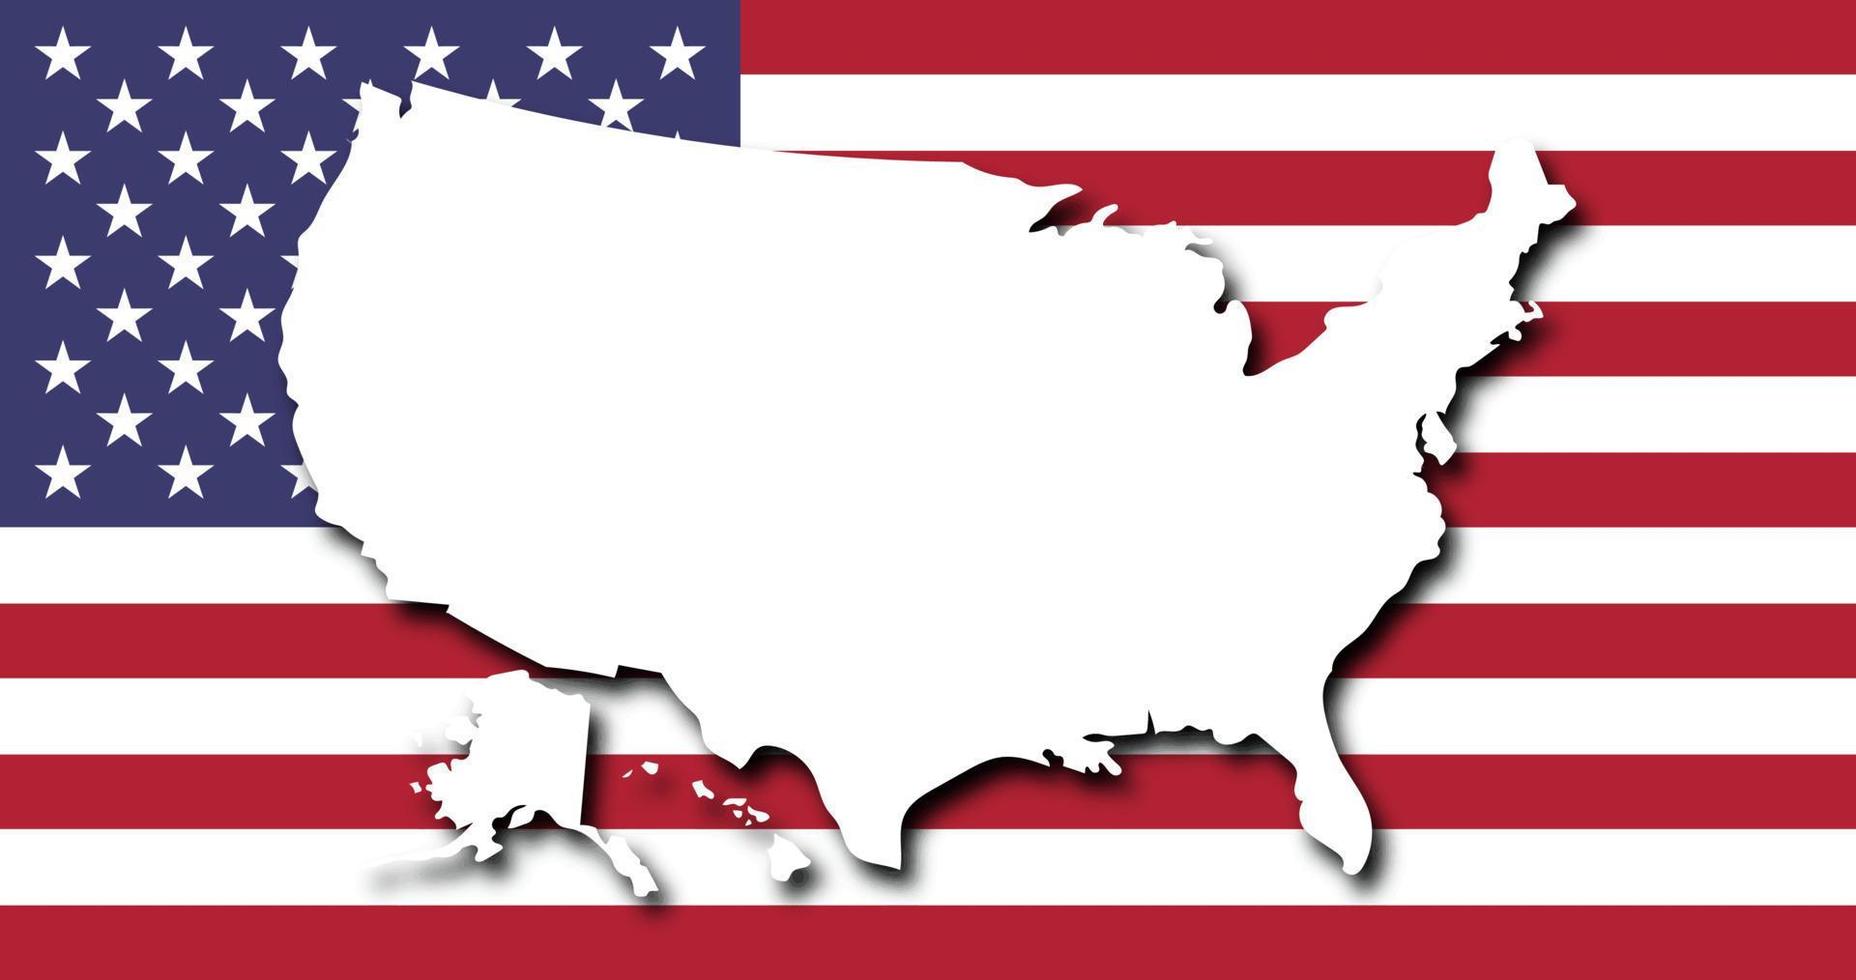 USA map and flag vector. America map. United States of America map and flag. Suitable for icon, logo, banner, background, or any content using America map theme vector